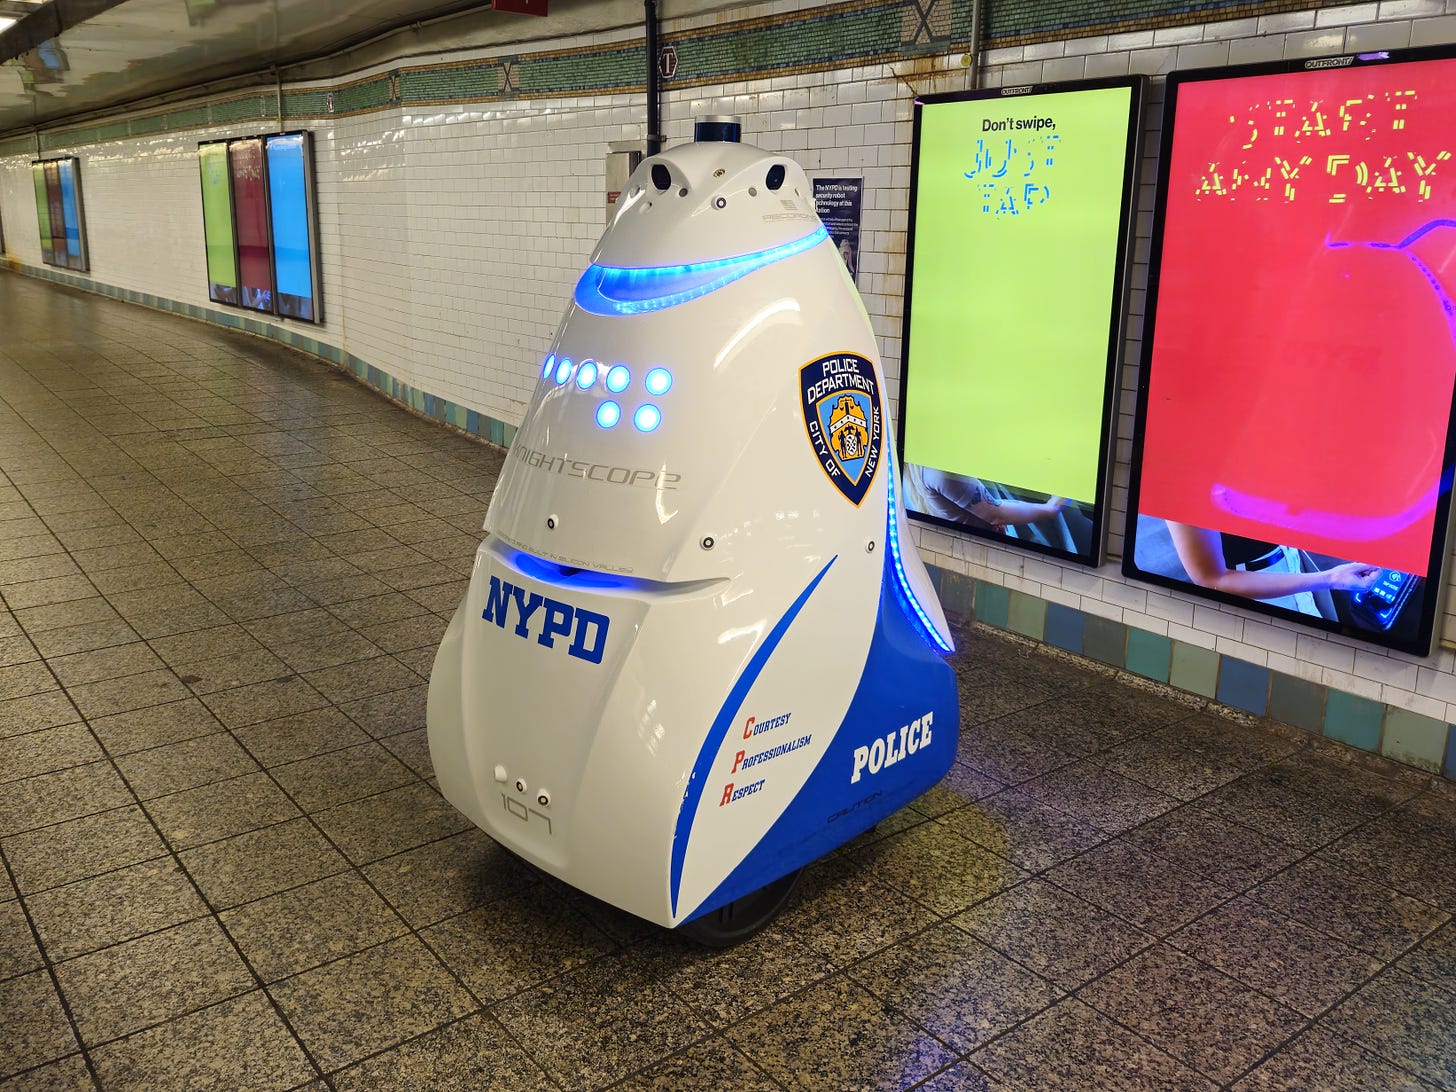 A photo of the Knightscope K5 autonomous robot in the Times Square subway station.